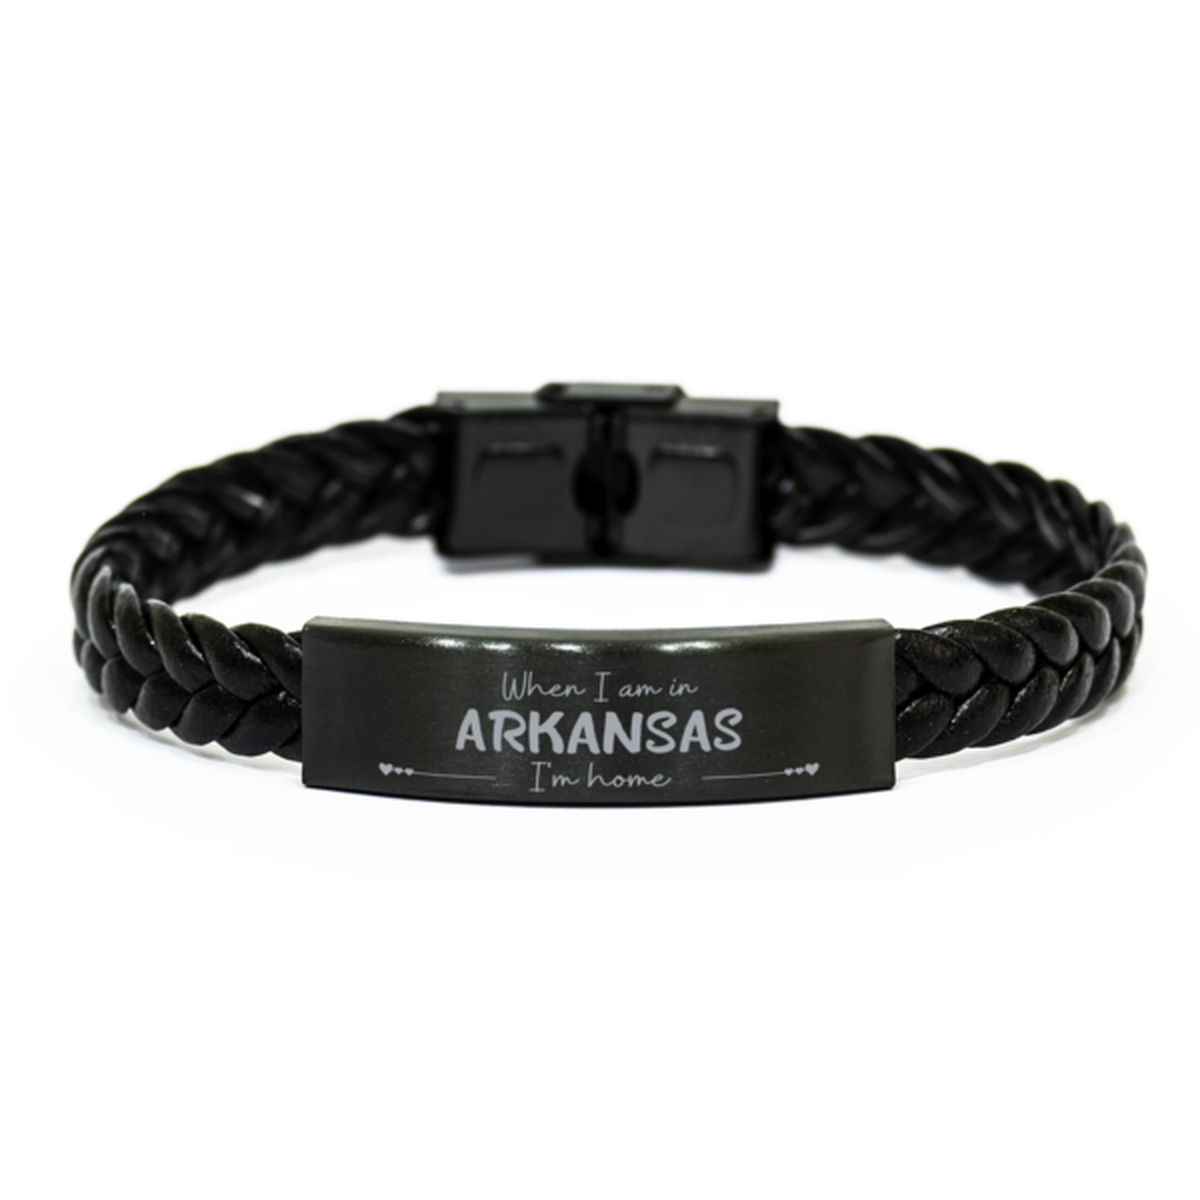 When I am in Arkansas I'm home Braided Leather Bracelet, Cheap Gifts For Arkansas, State Arkansas Birthday Gifts for Friends Coworker